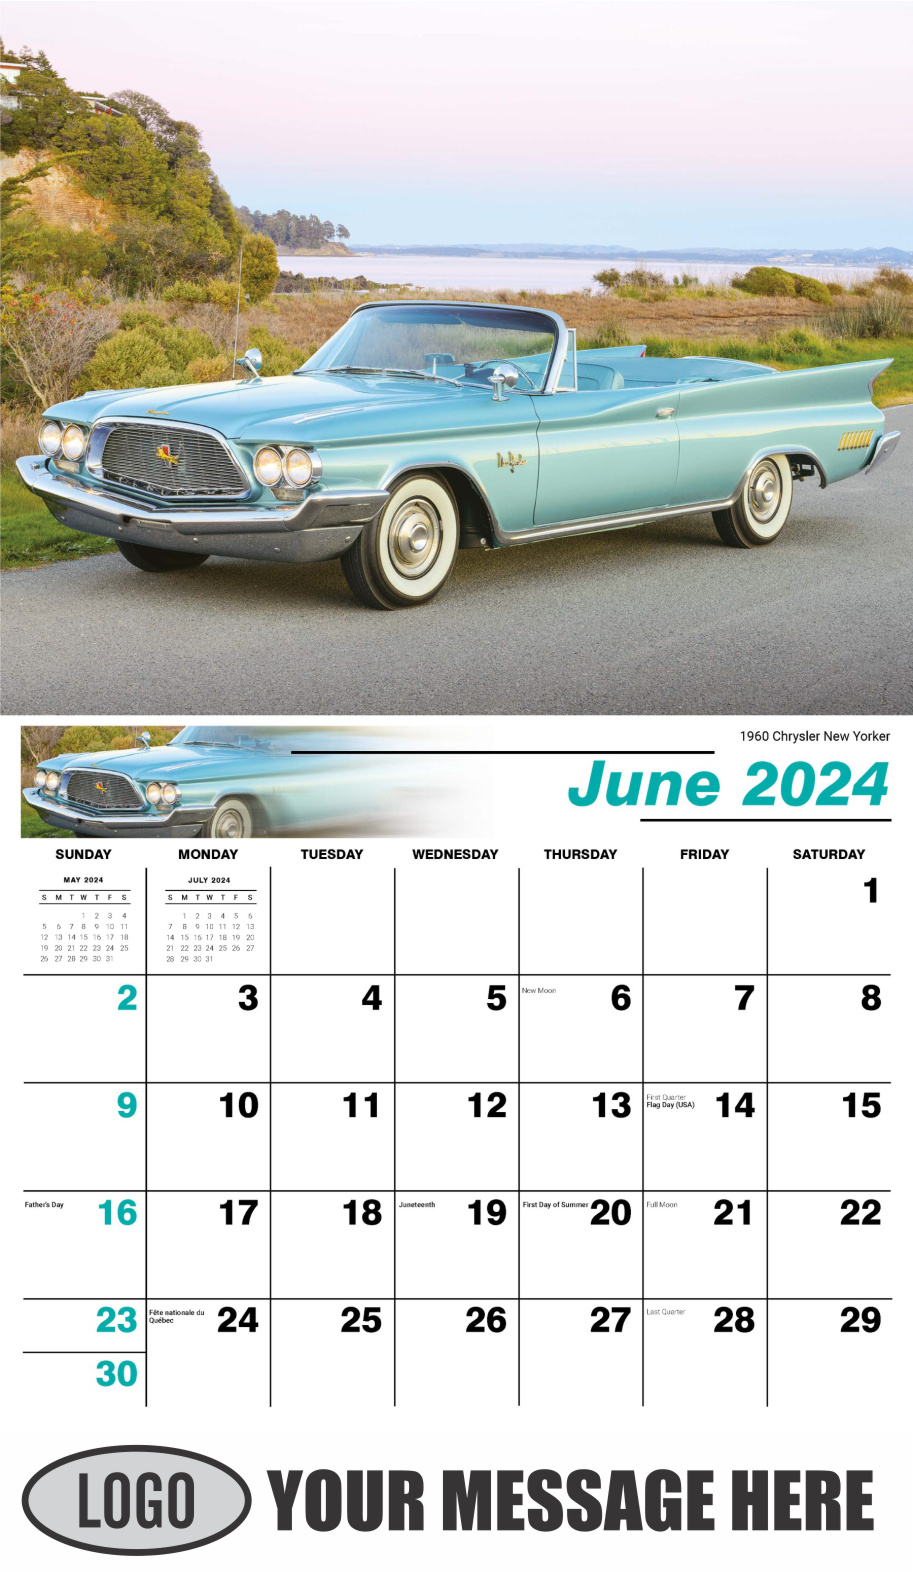 2024 Promotional Calendar Classic Cars low as 65¢